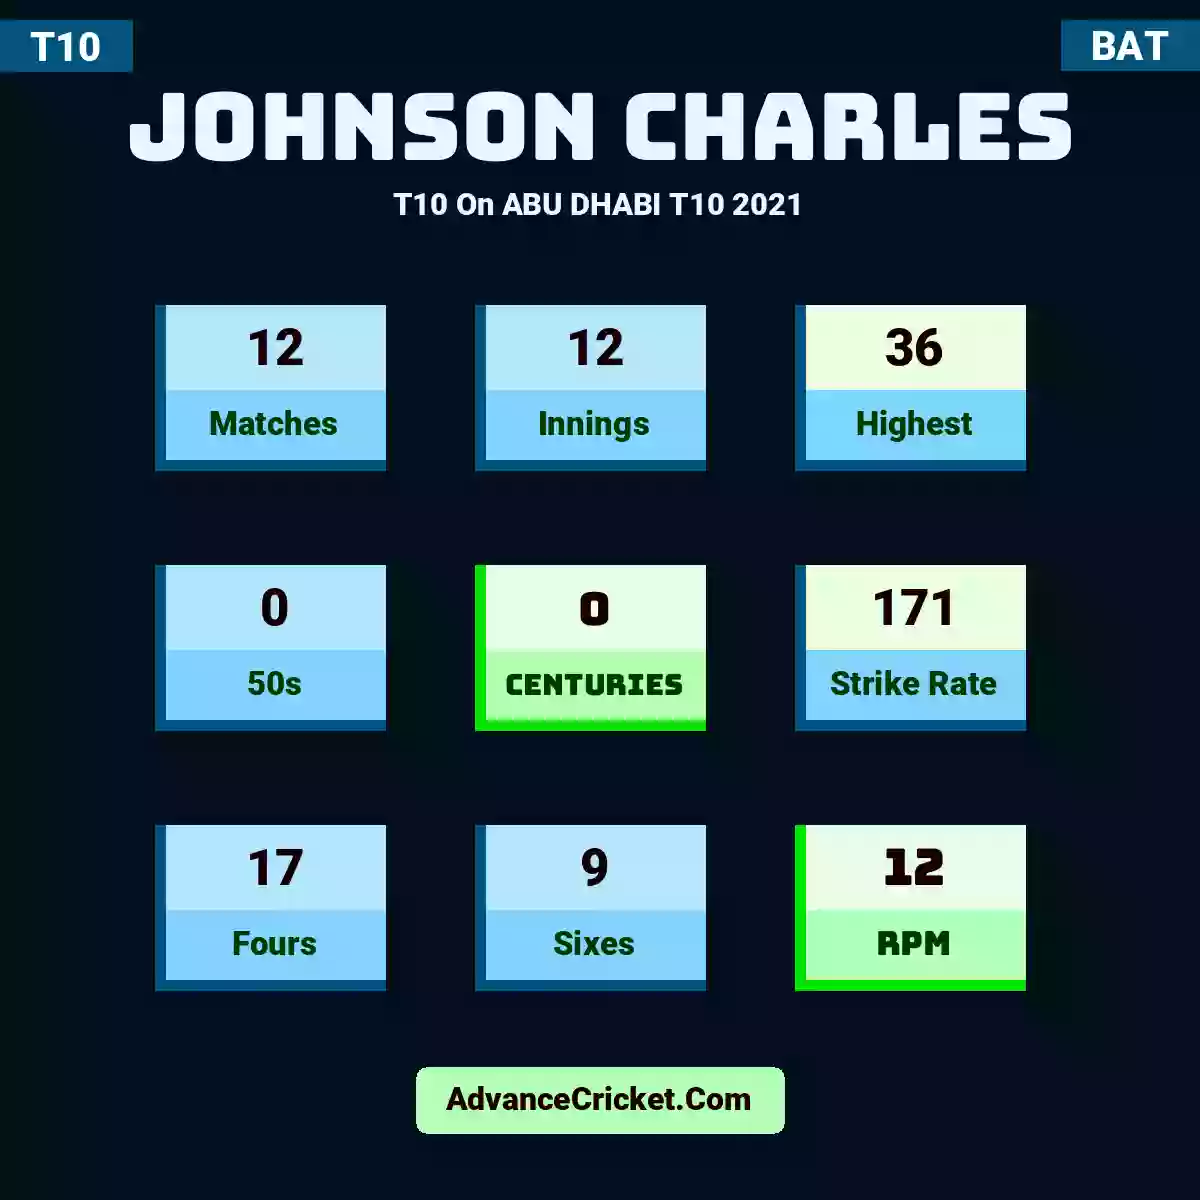 Johnson Charles T10  On ABU DHABI T10 2021, Johnson Charles played 12 matches, scored 36 runs as highest, 0 half-centuries, and 0 centuries, with a strike rate of 171. J.Charles hit 17 fours and 9 sixes, with an RPM of 12.